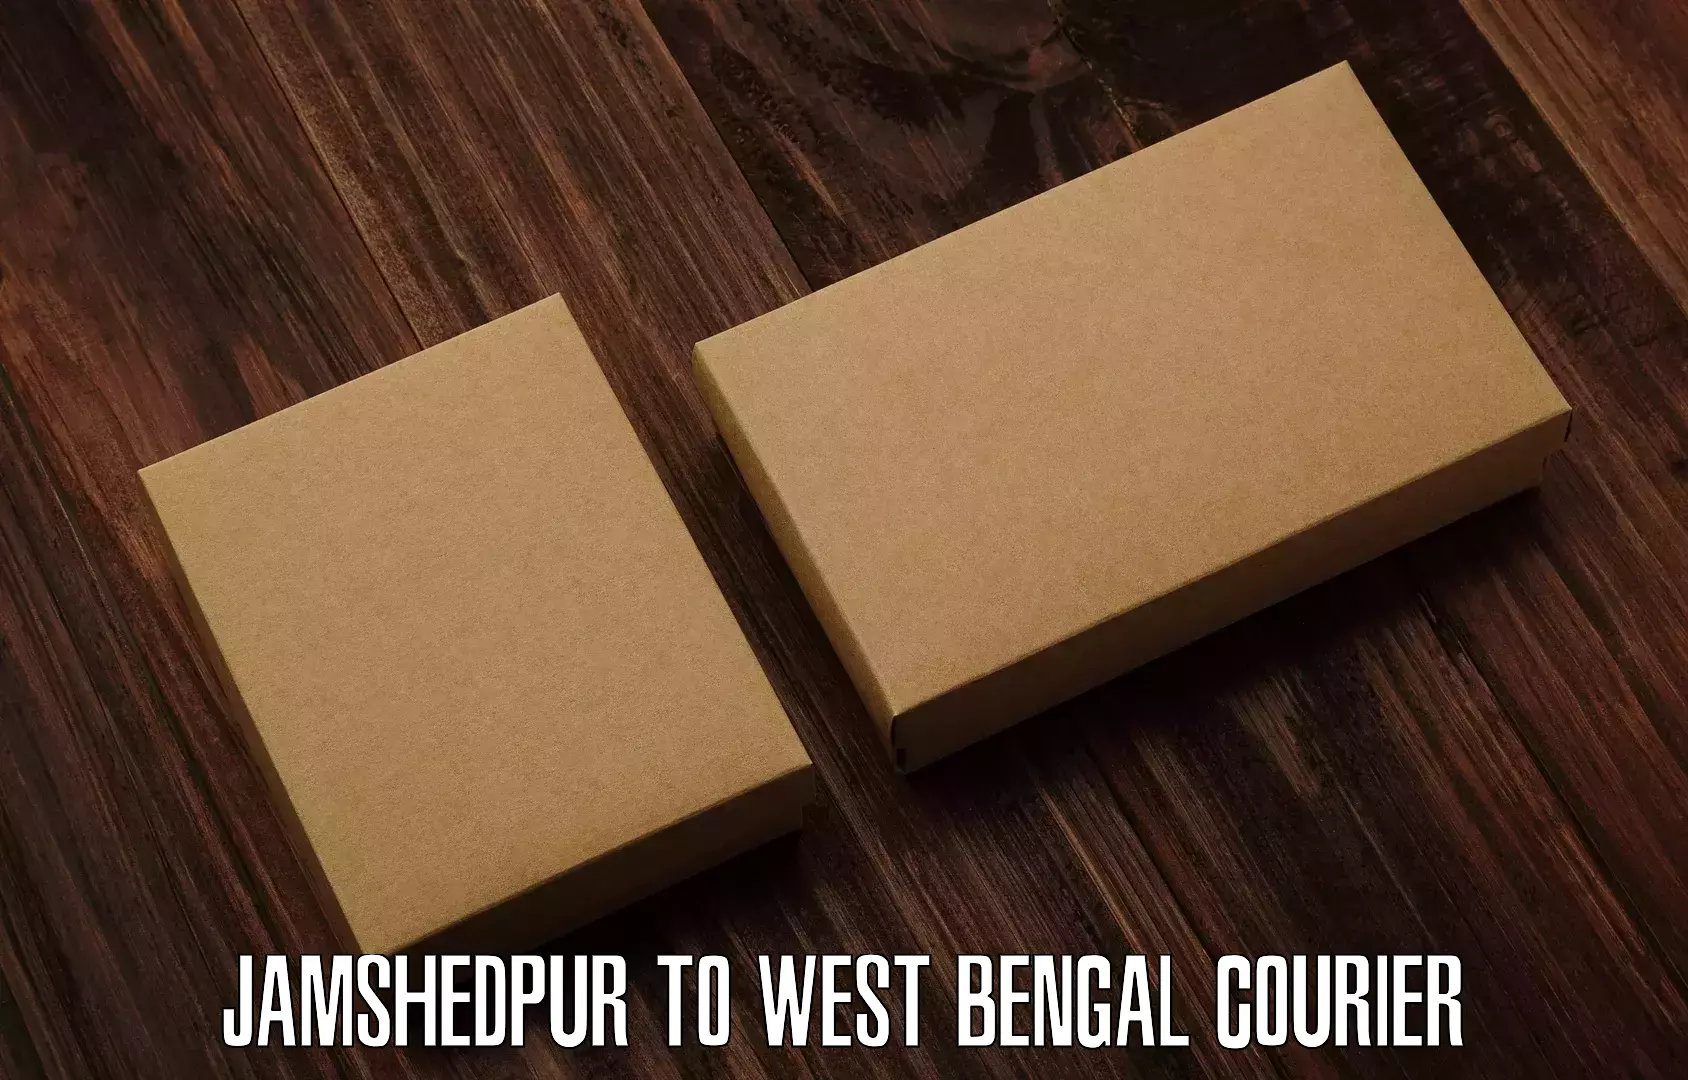 Flexible delivery schedules Jamshedpur to Barrackpore